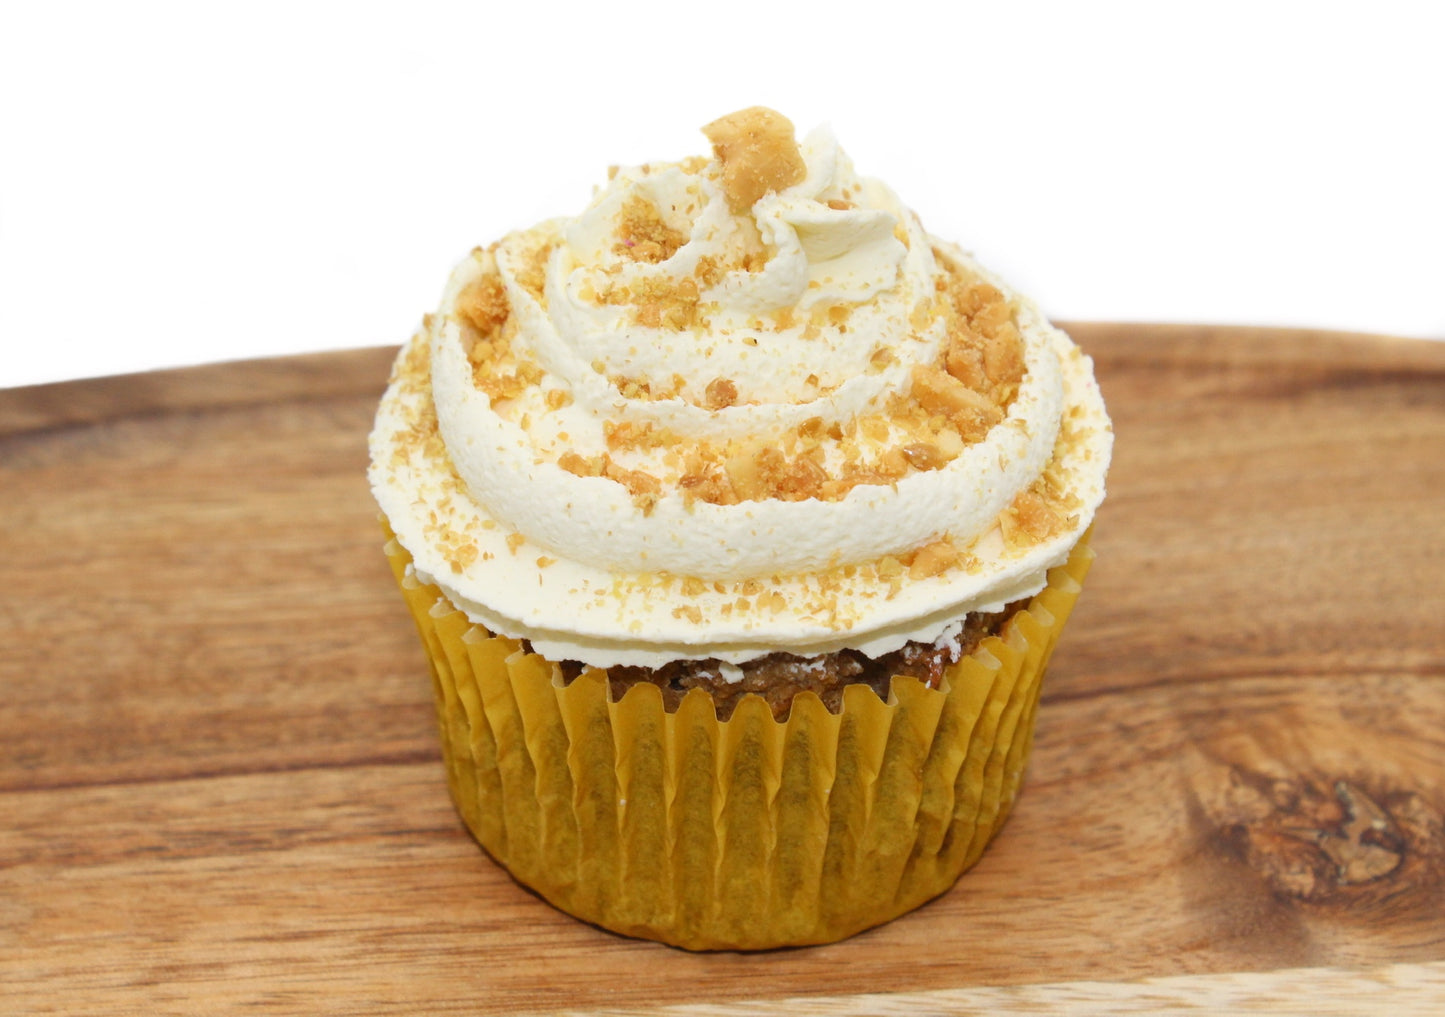 A plump cupcake wrapped in a yellow paper liner with white, piped frosting, crushed peanuts and flaxseed on top.